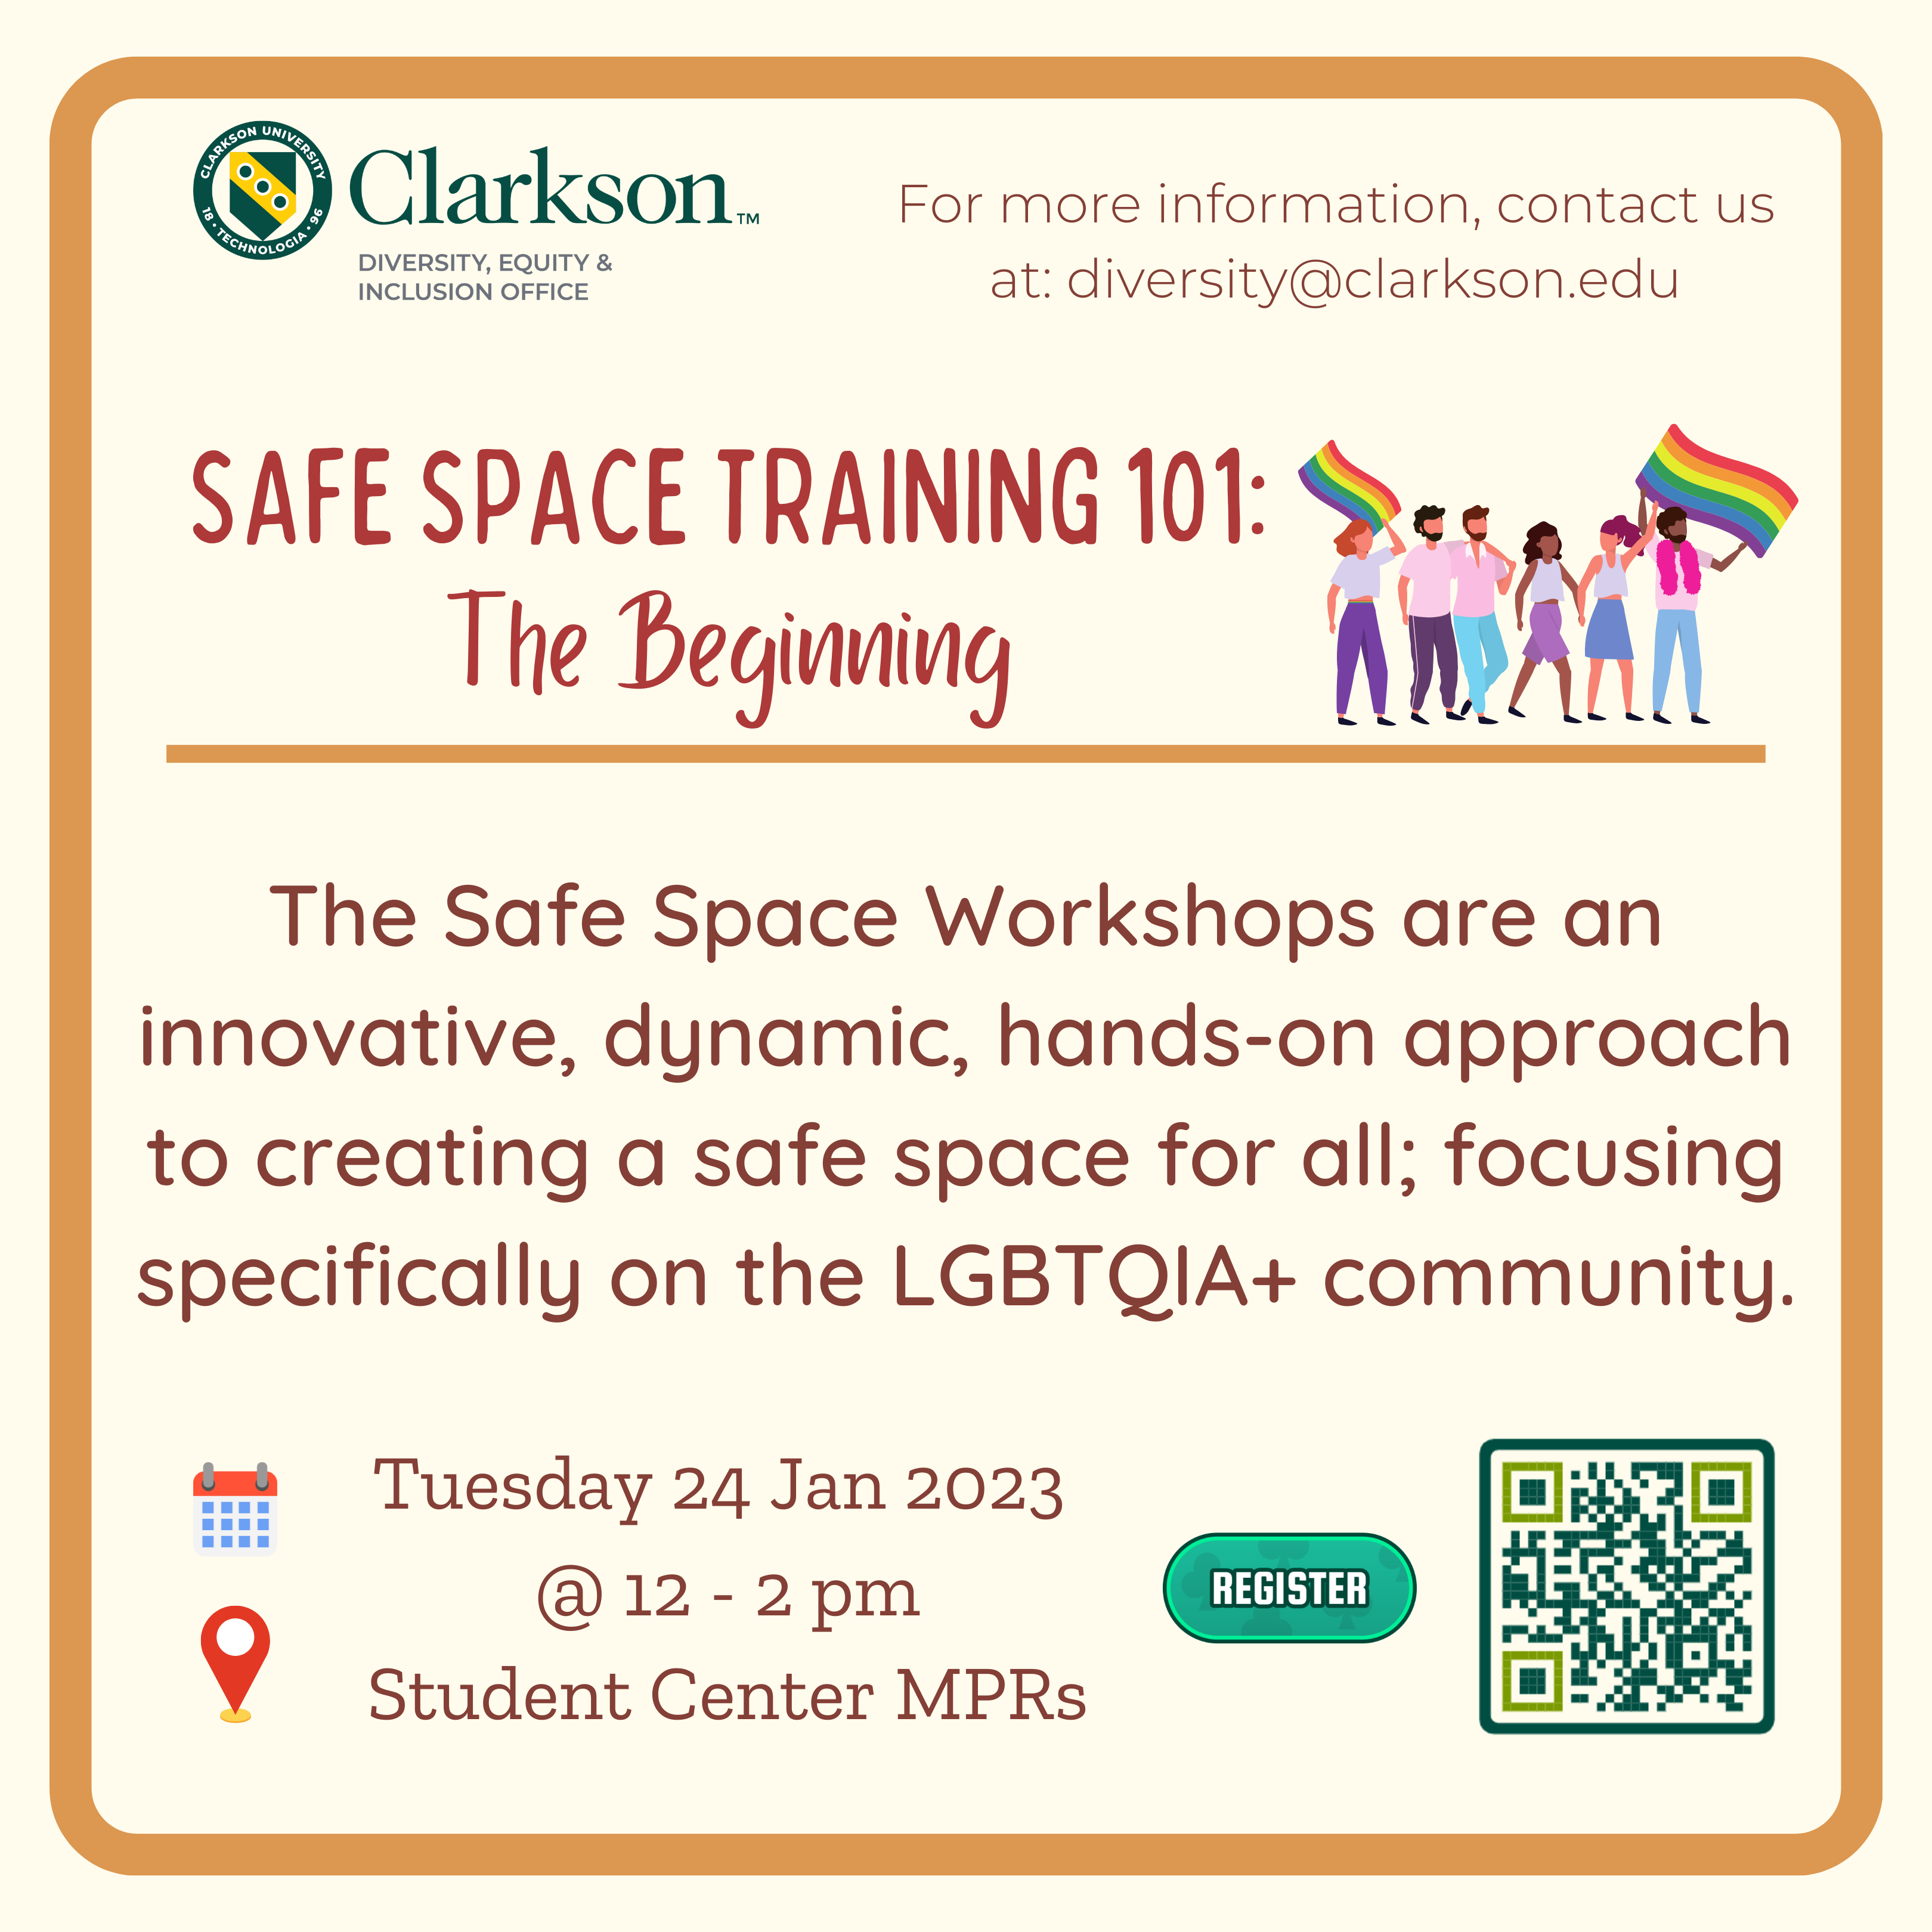 Safe Space 101 Training: The Beginning